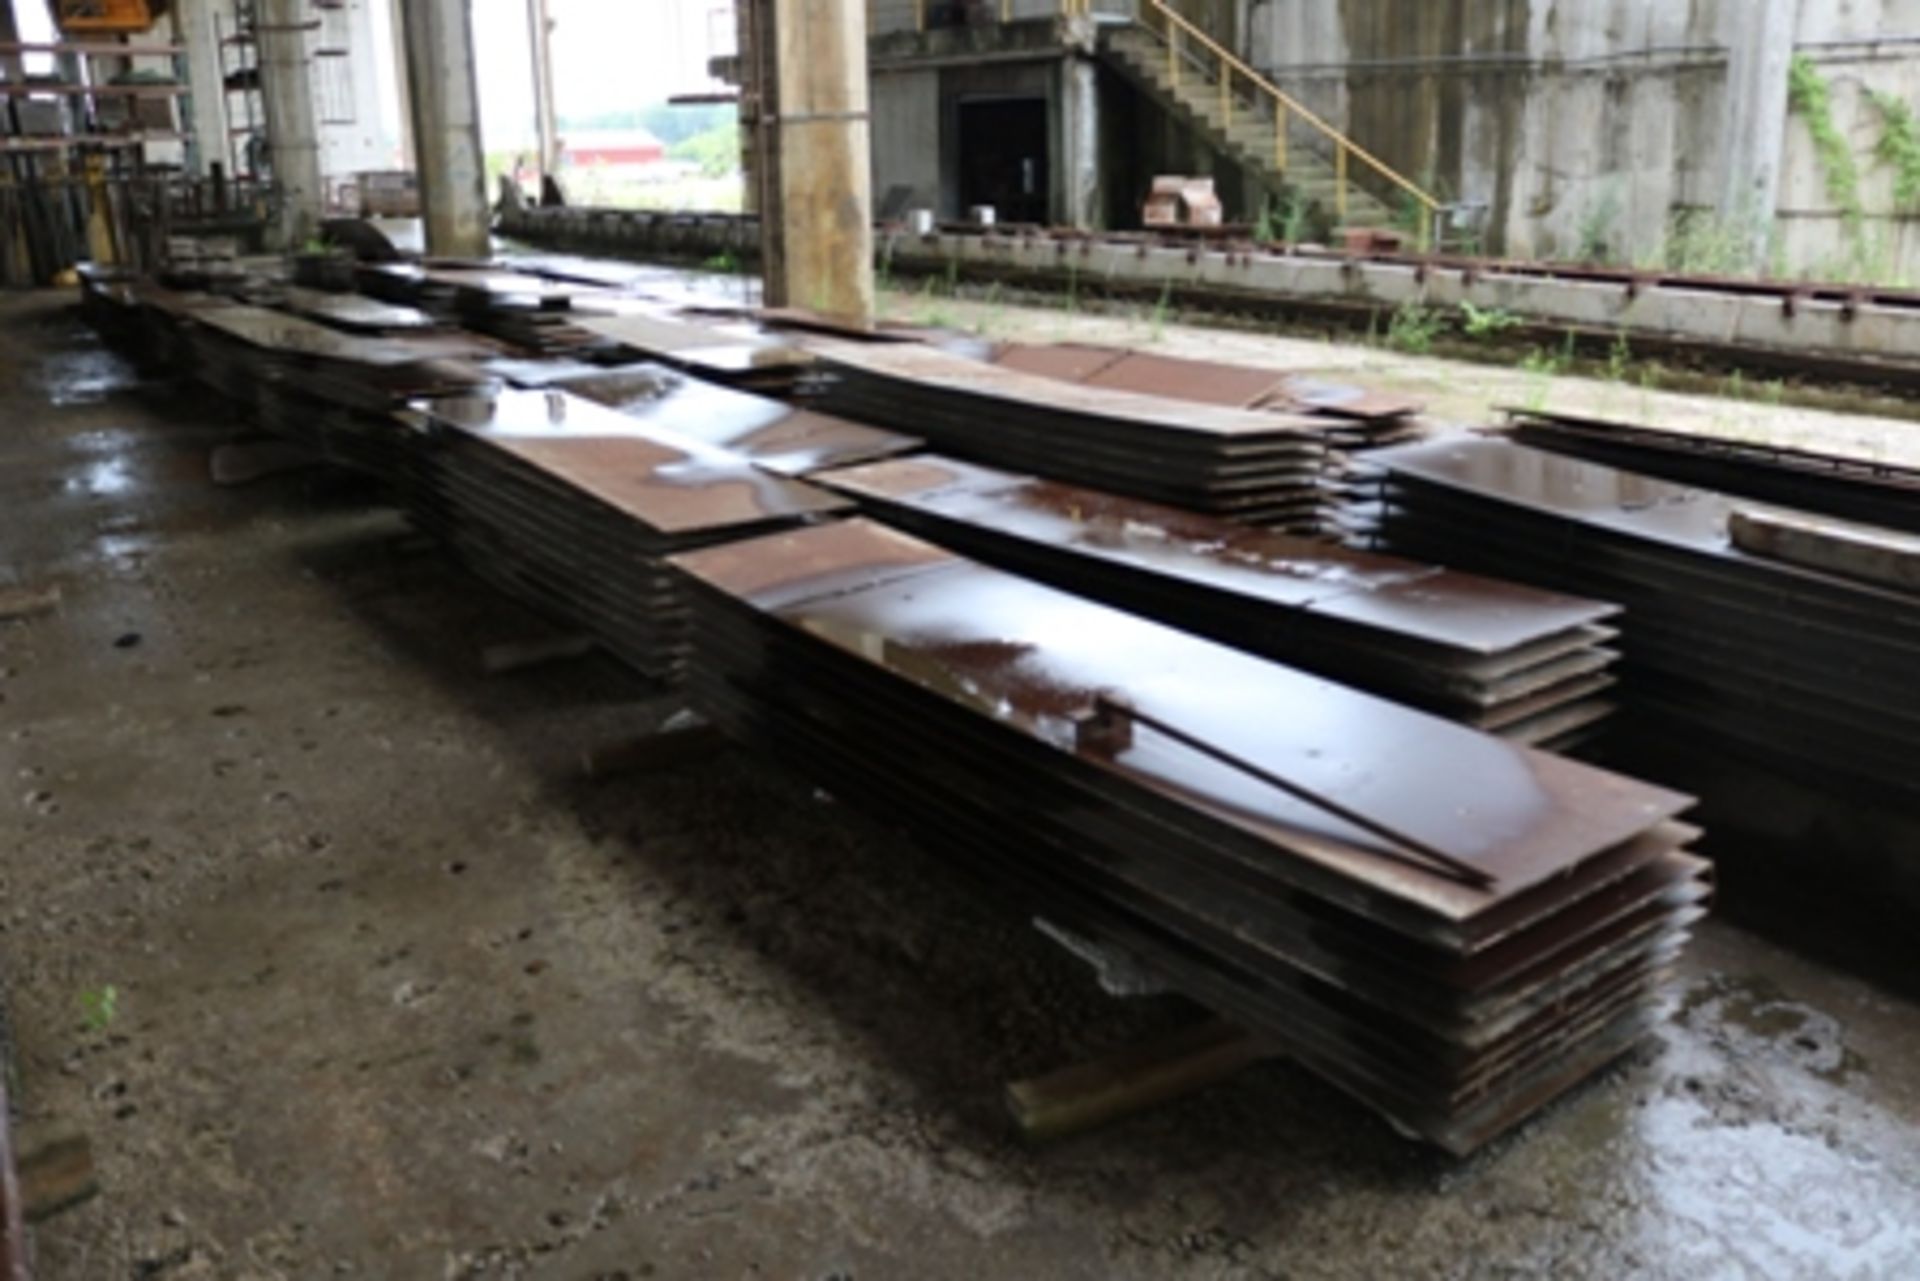 Approximately 35 piles of 2' x 10' steel panels for lines